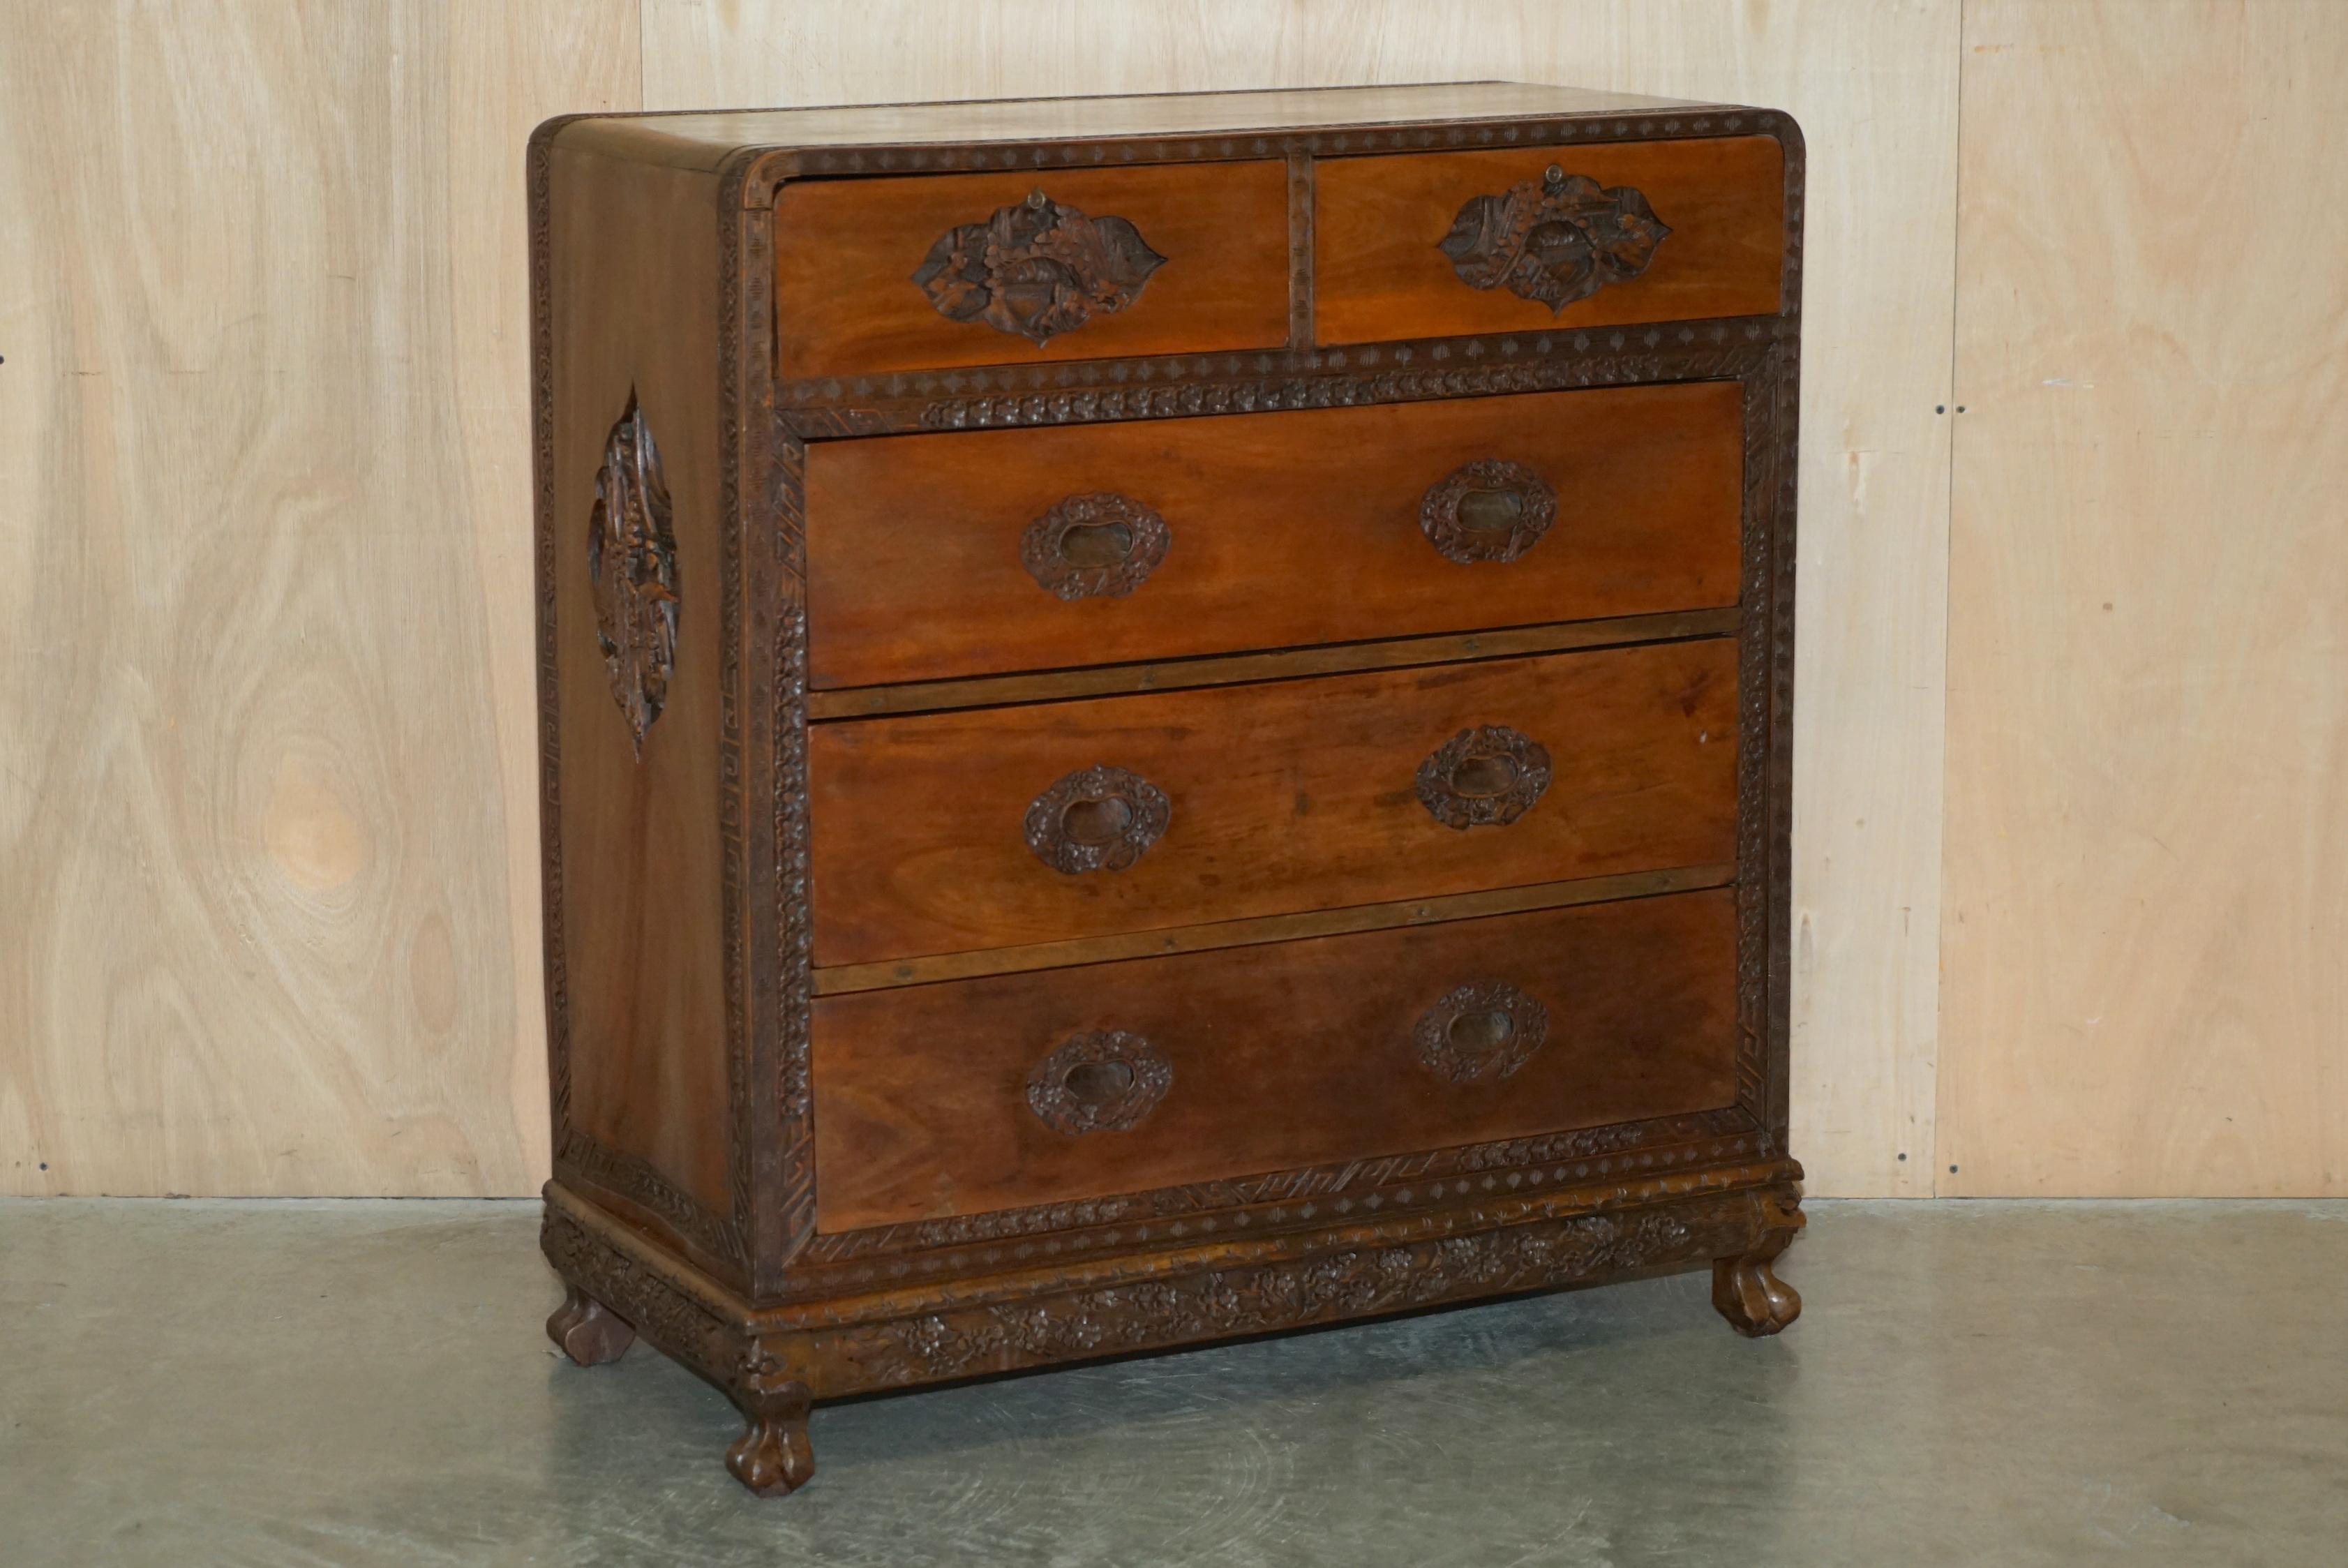 Royal House Antiques

Royal House Antiques is delighted to offer for sale these absolutely stunning, ornately hand carved Chinese export circa 1890 chest of drawers in Camphor wood 

Please note the delivery fee listed is just a guide, it covers